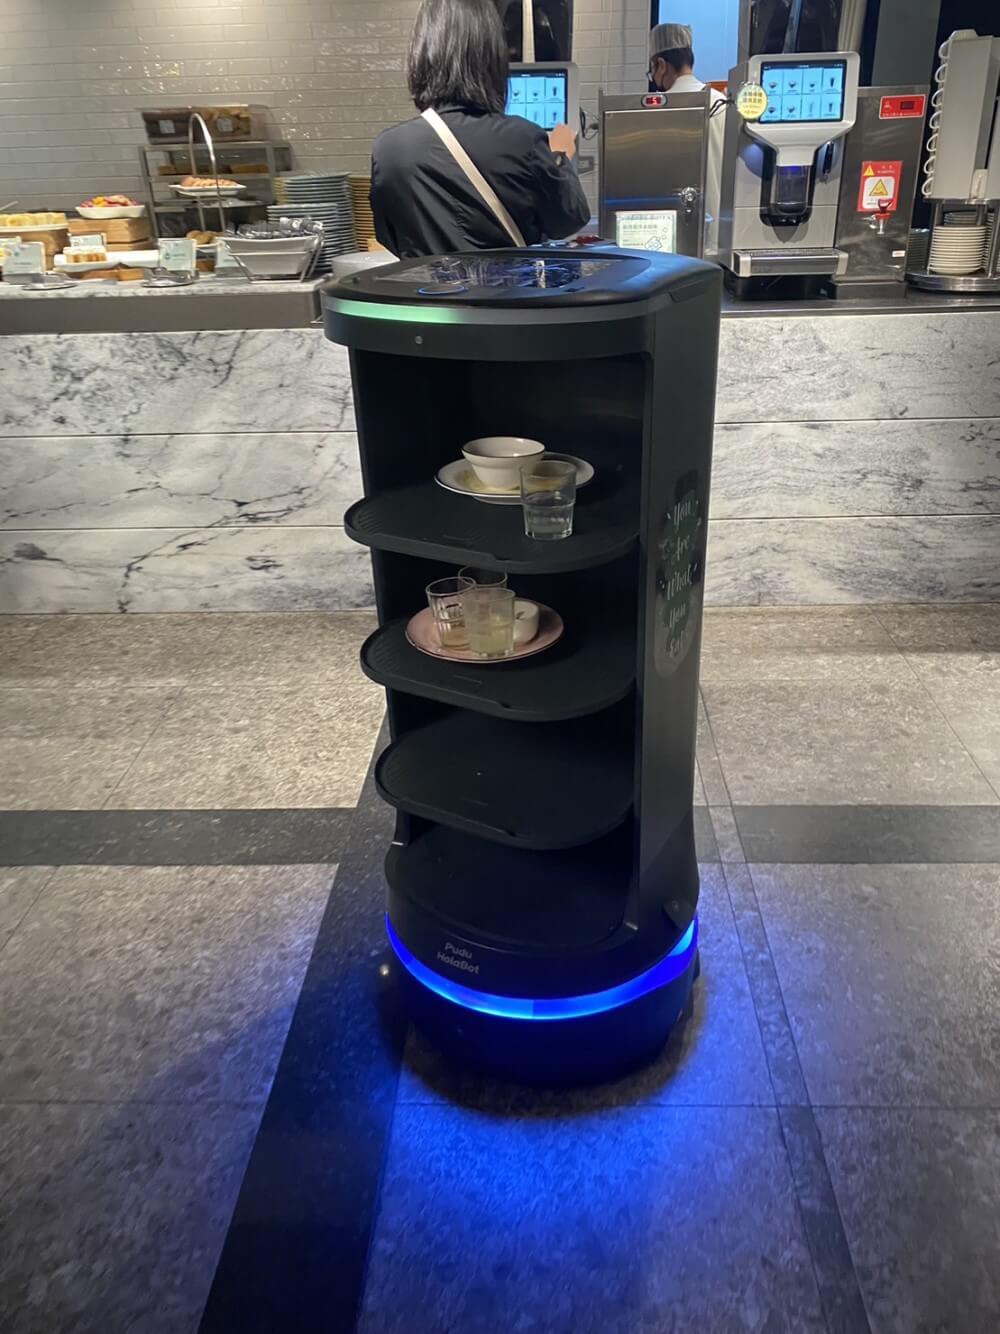 Automatic food delivery robot in the bubble tea store